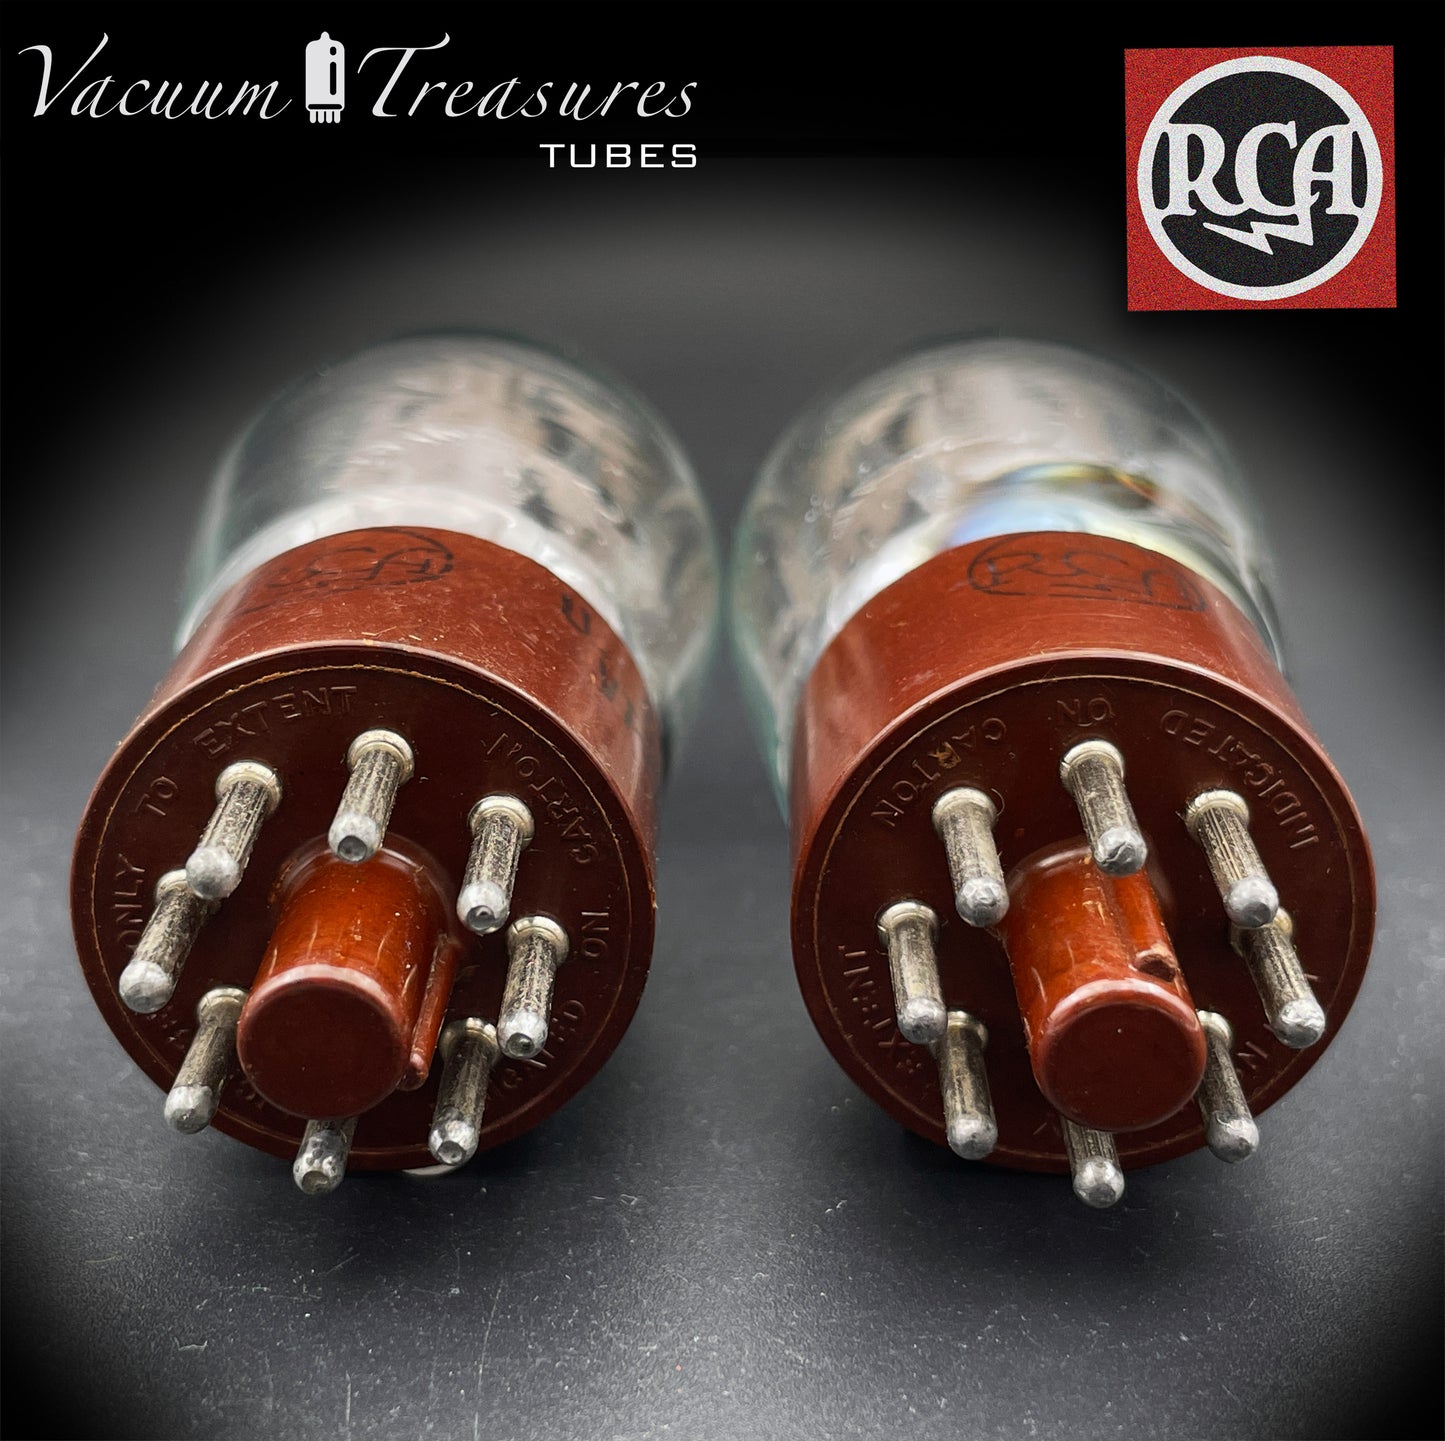 1626 (VT-137) RCA NOS Power Triode für Darling-Amp Matched Pair MADE IN USA